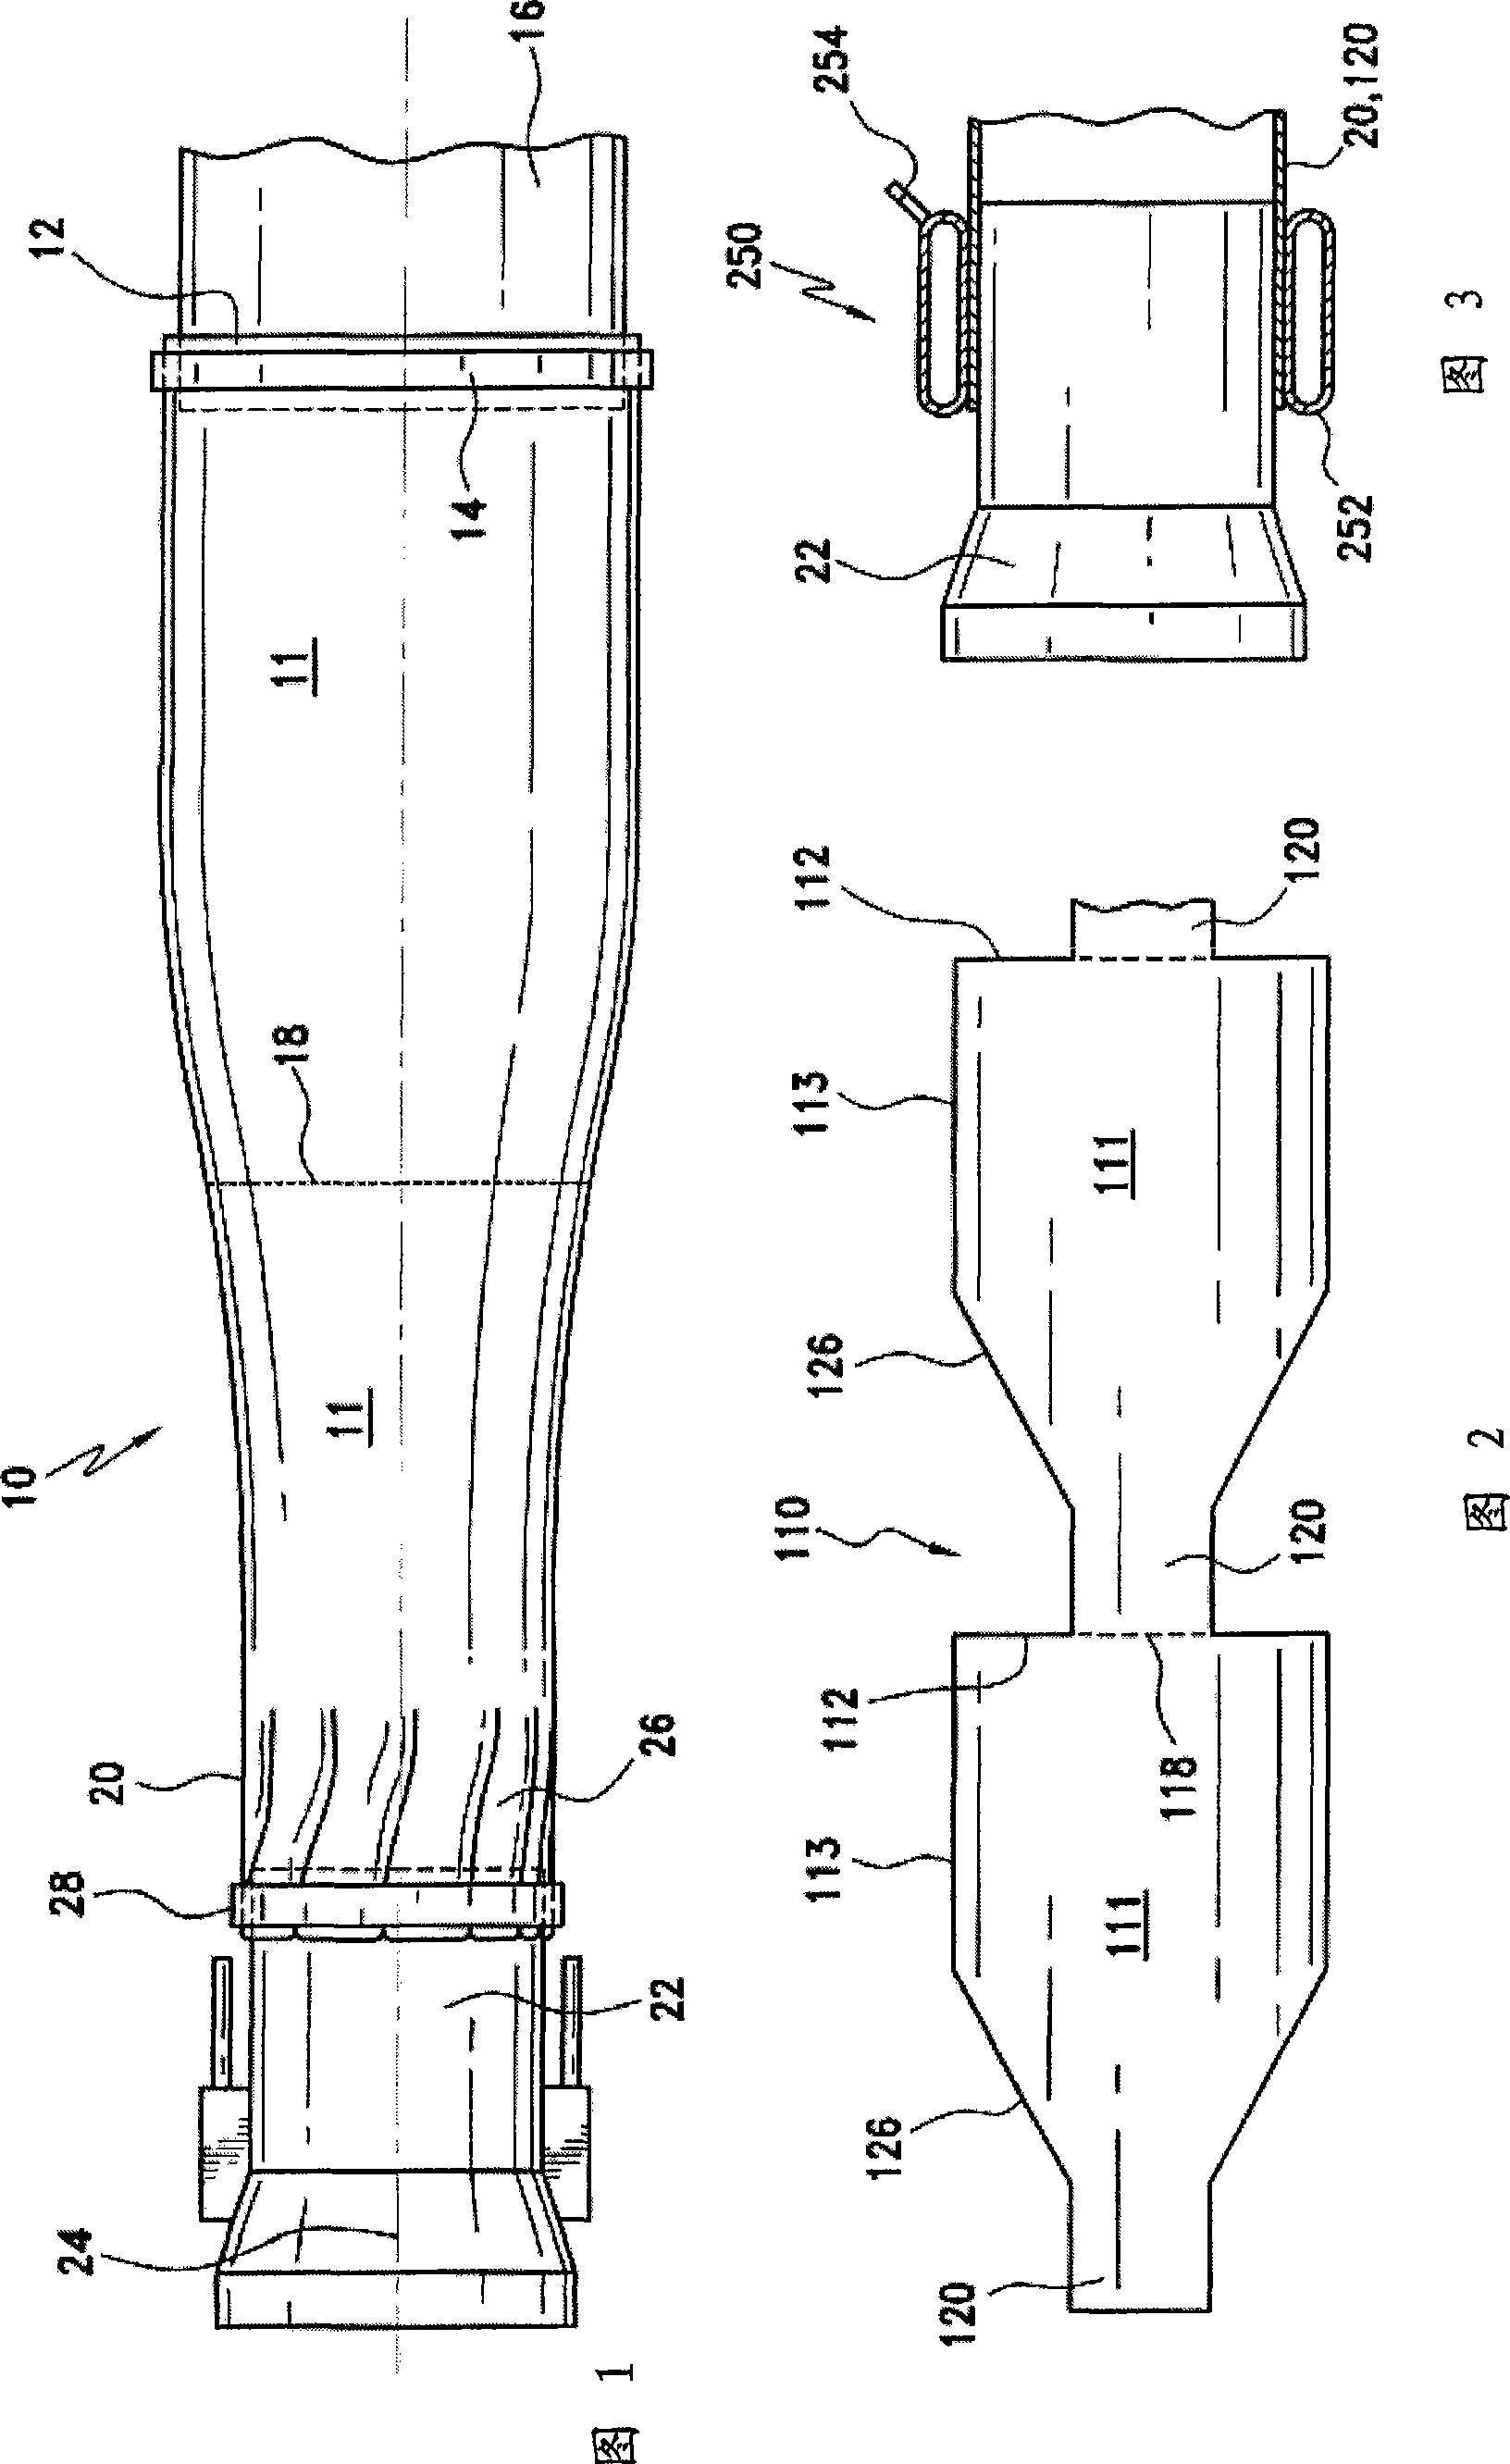 Semi-disposable pre-conditioned air supply hose conduit and connectors for attaching end portions of the same